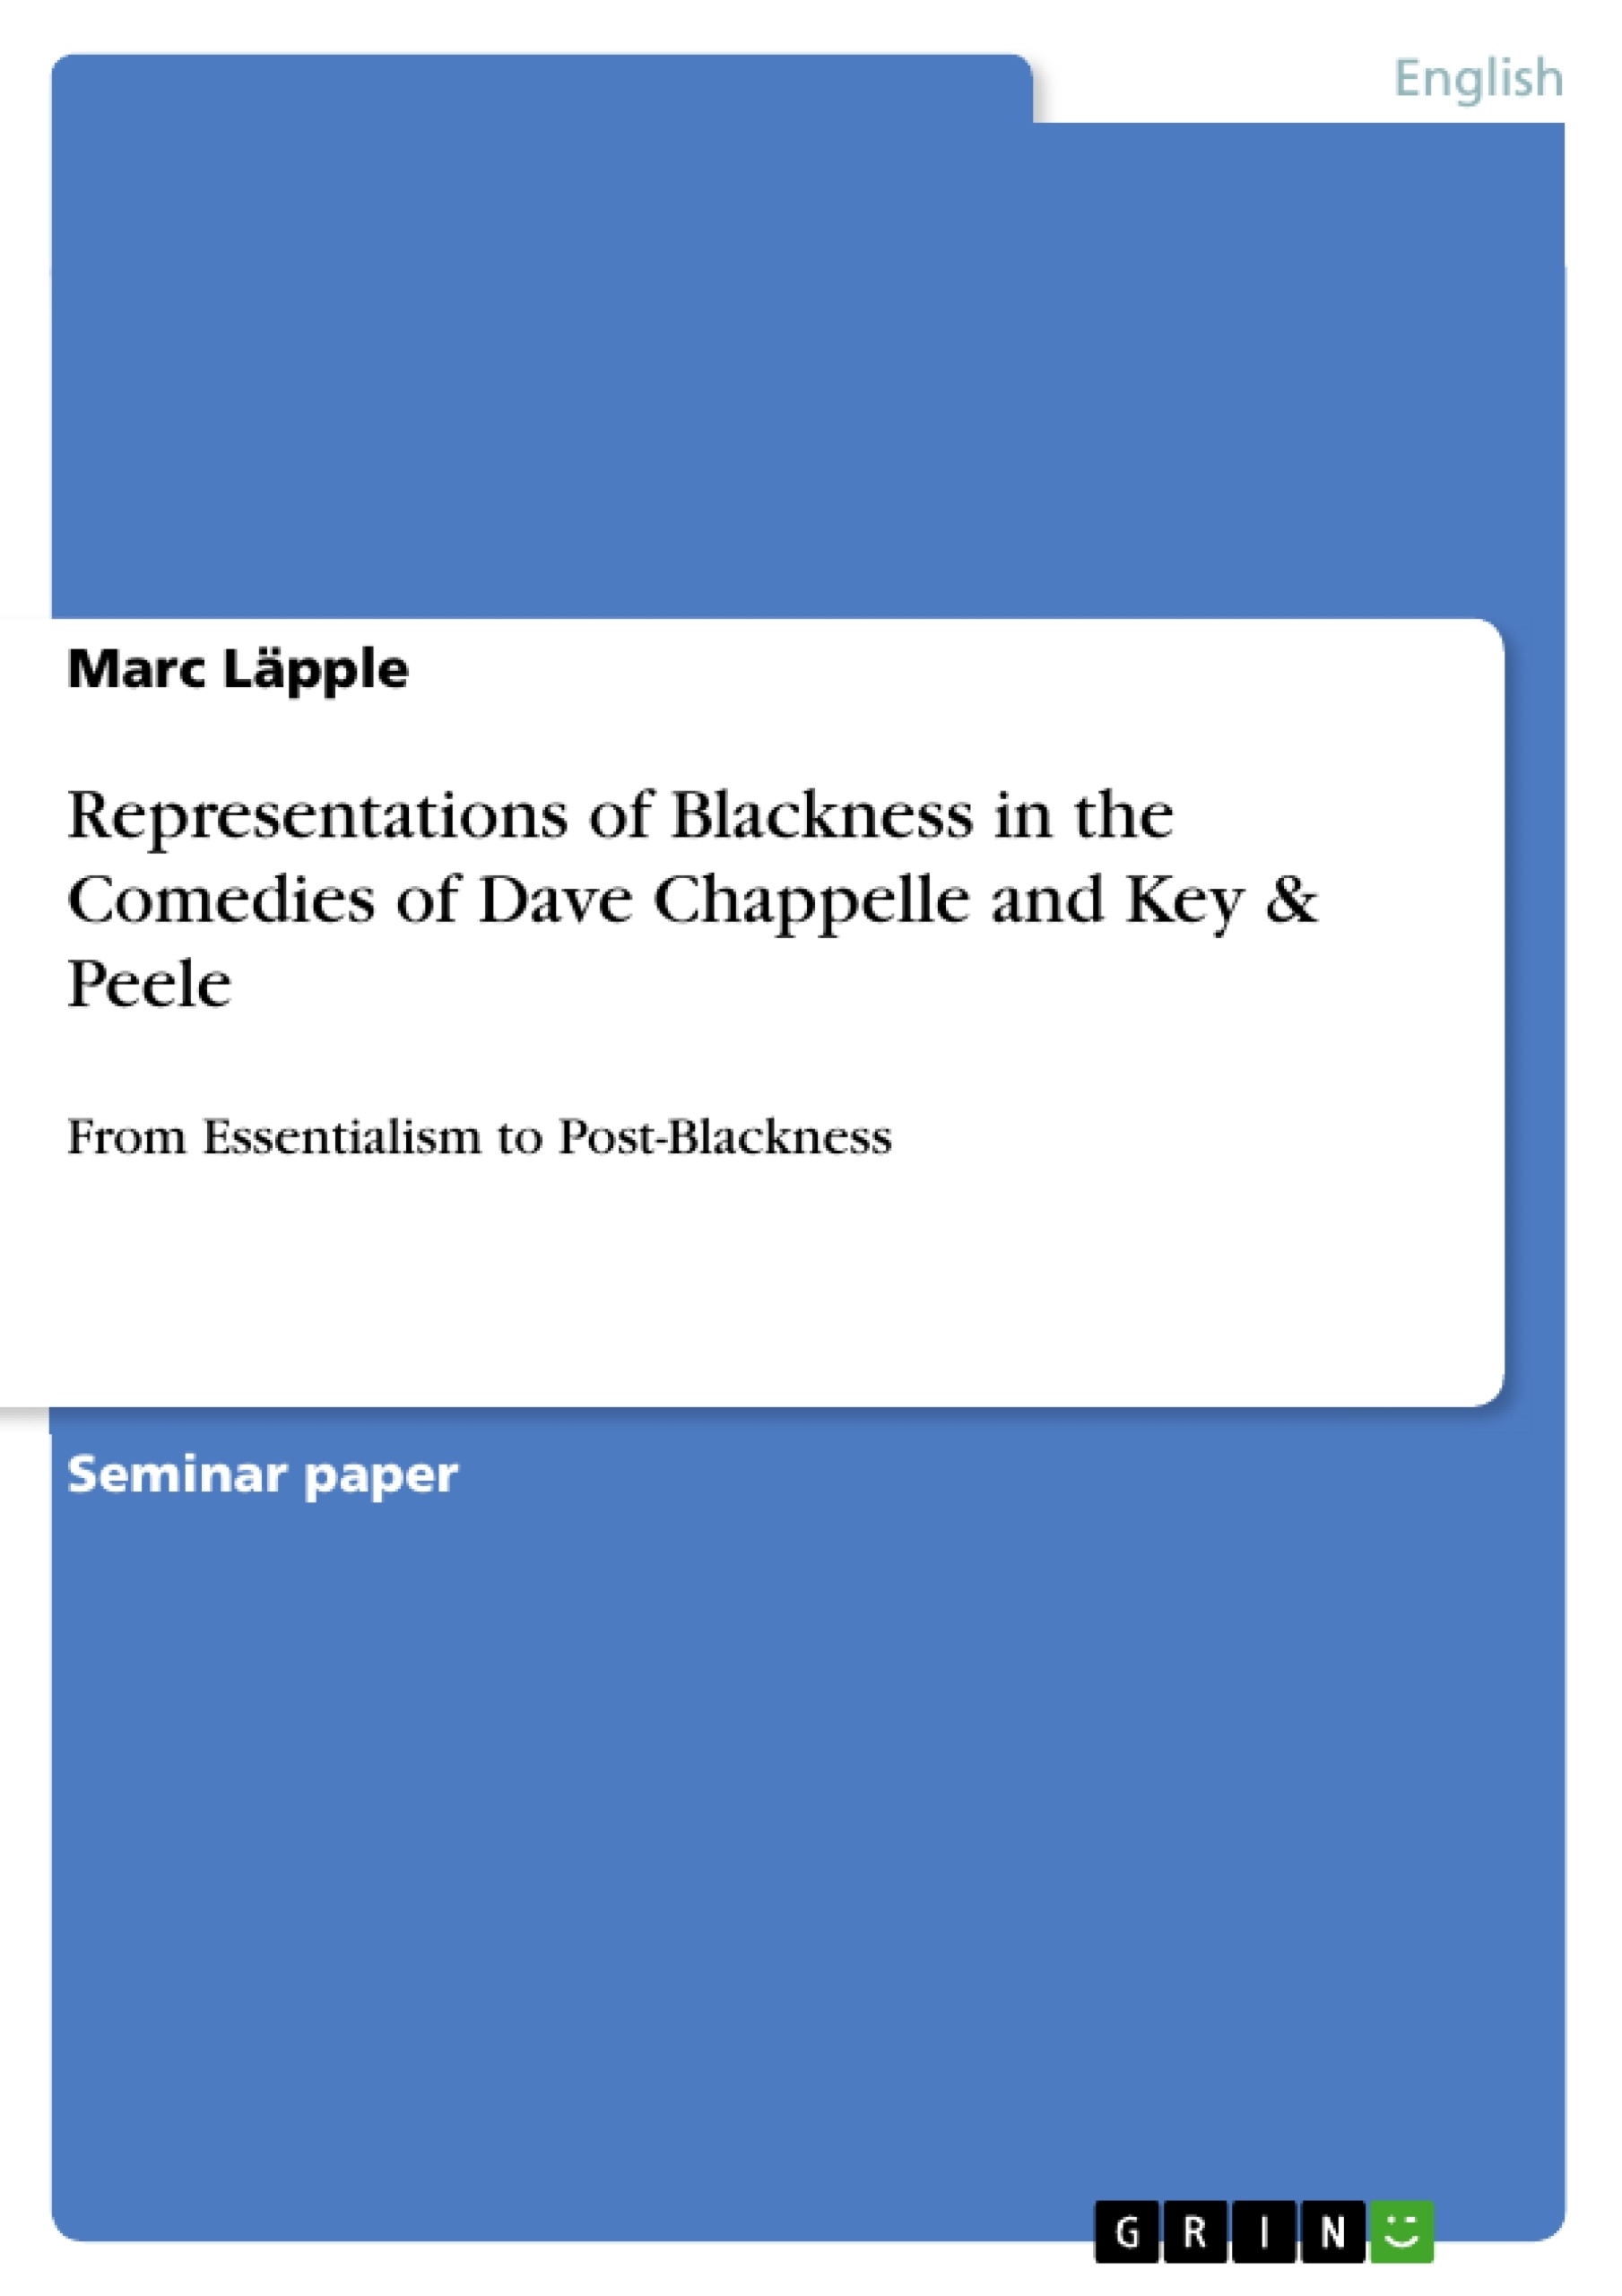 Title: Representations of Blackness in the Comedies of Dave Chappelle and Key & Peele